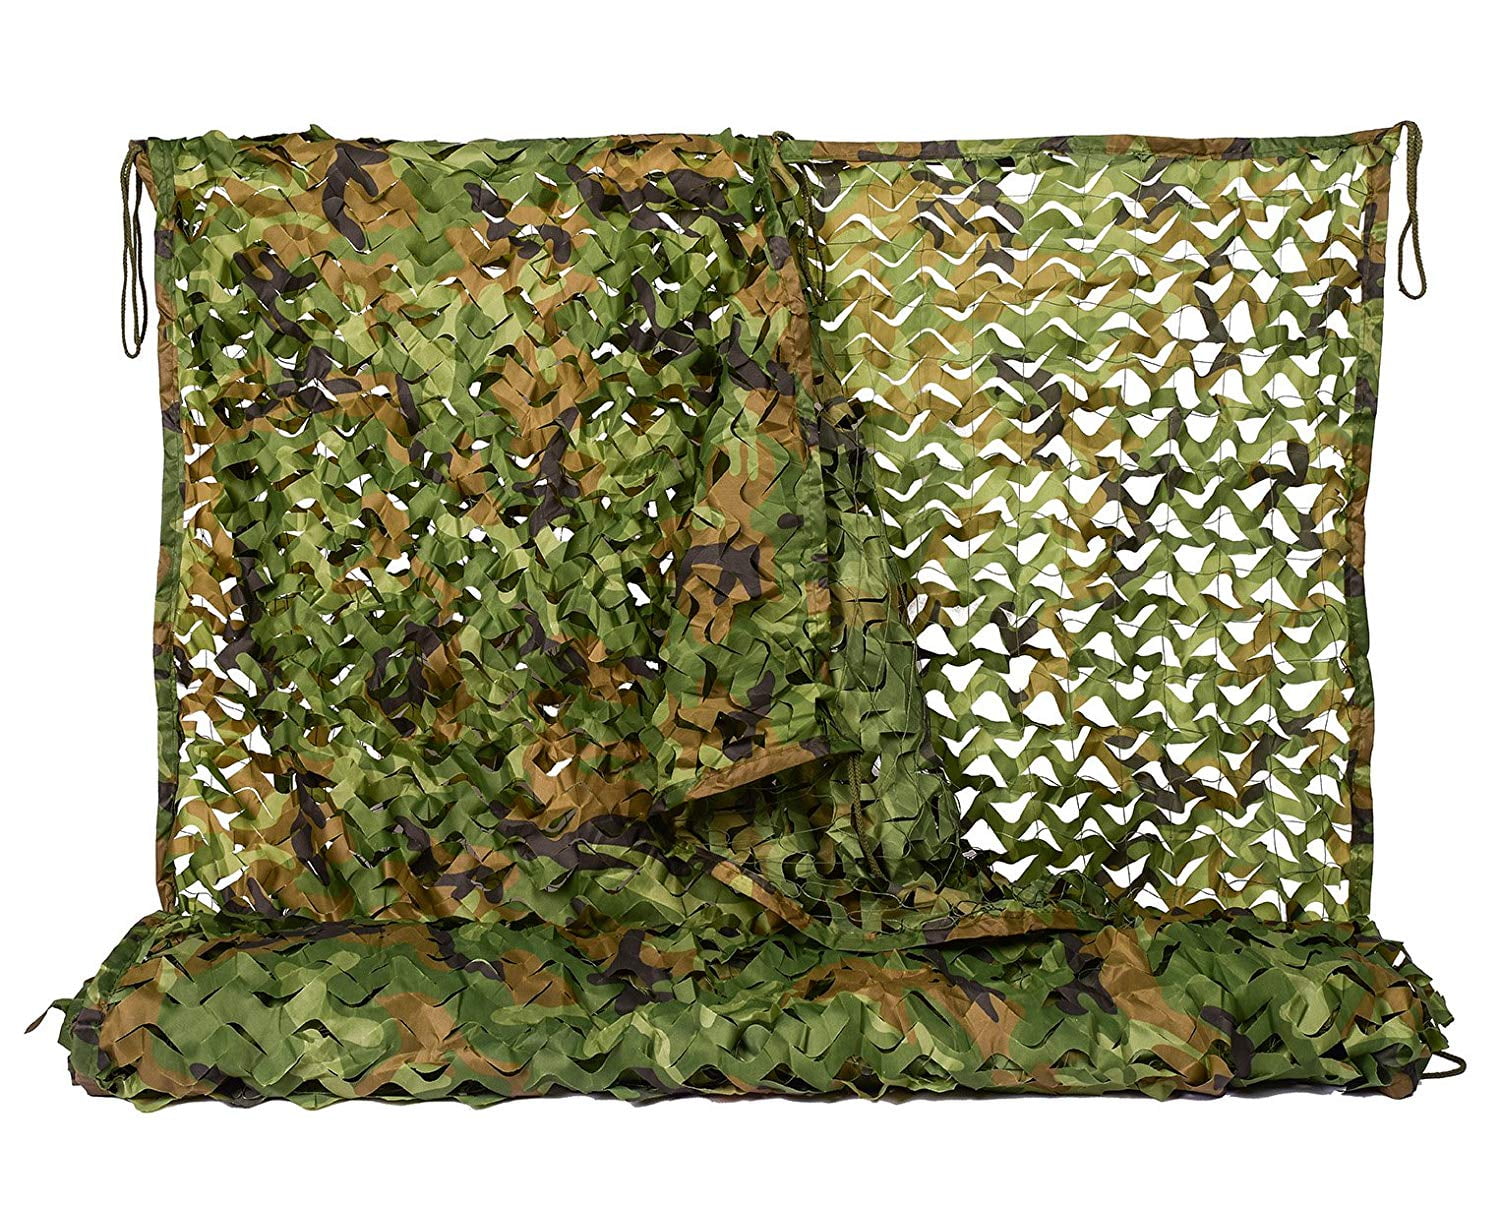 26 x 26FT Woodland Leaves Green Camouflage Net Hunting Camo+String Netting US 